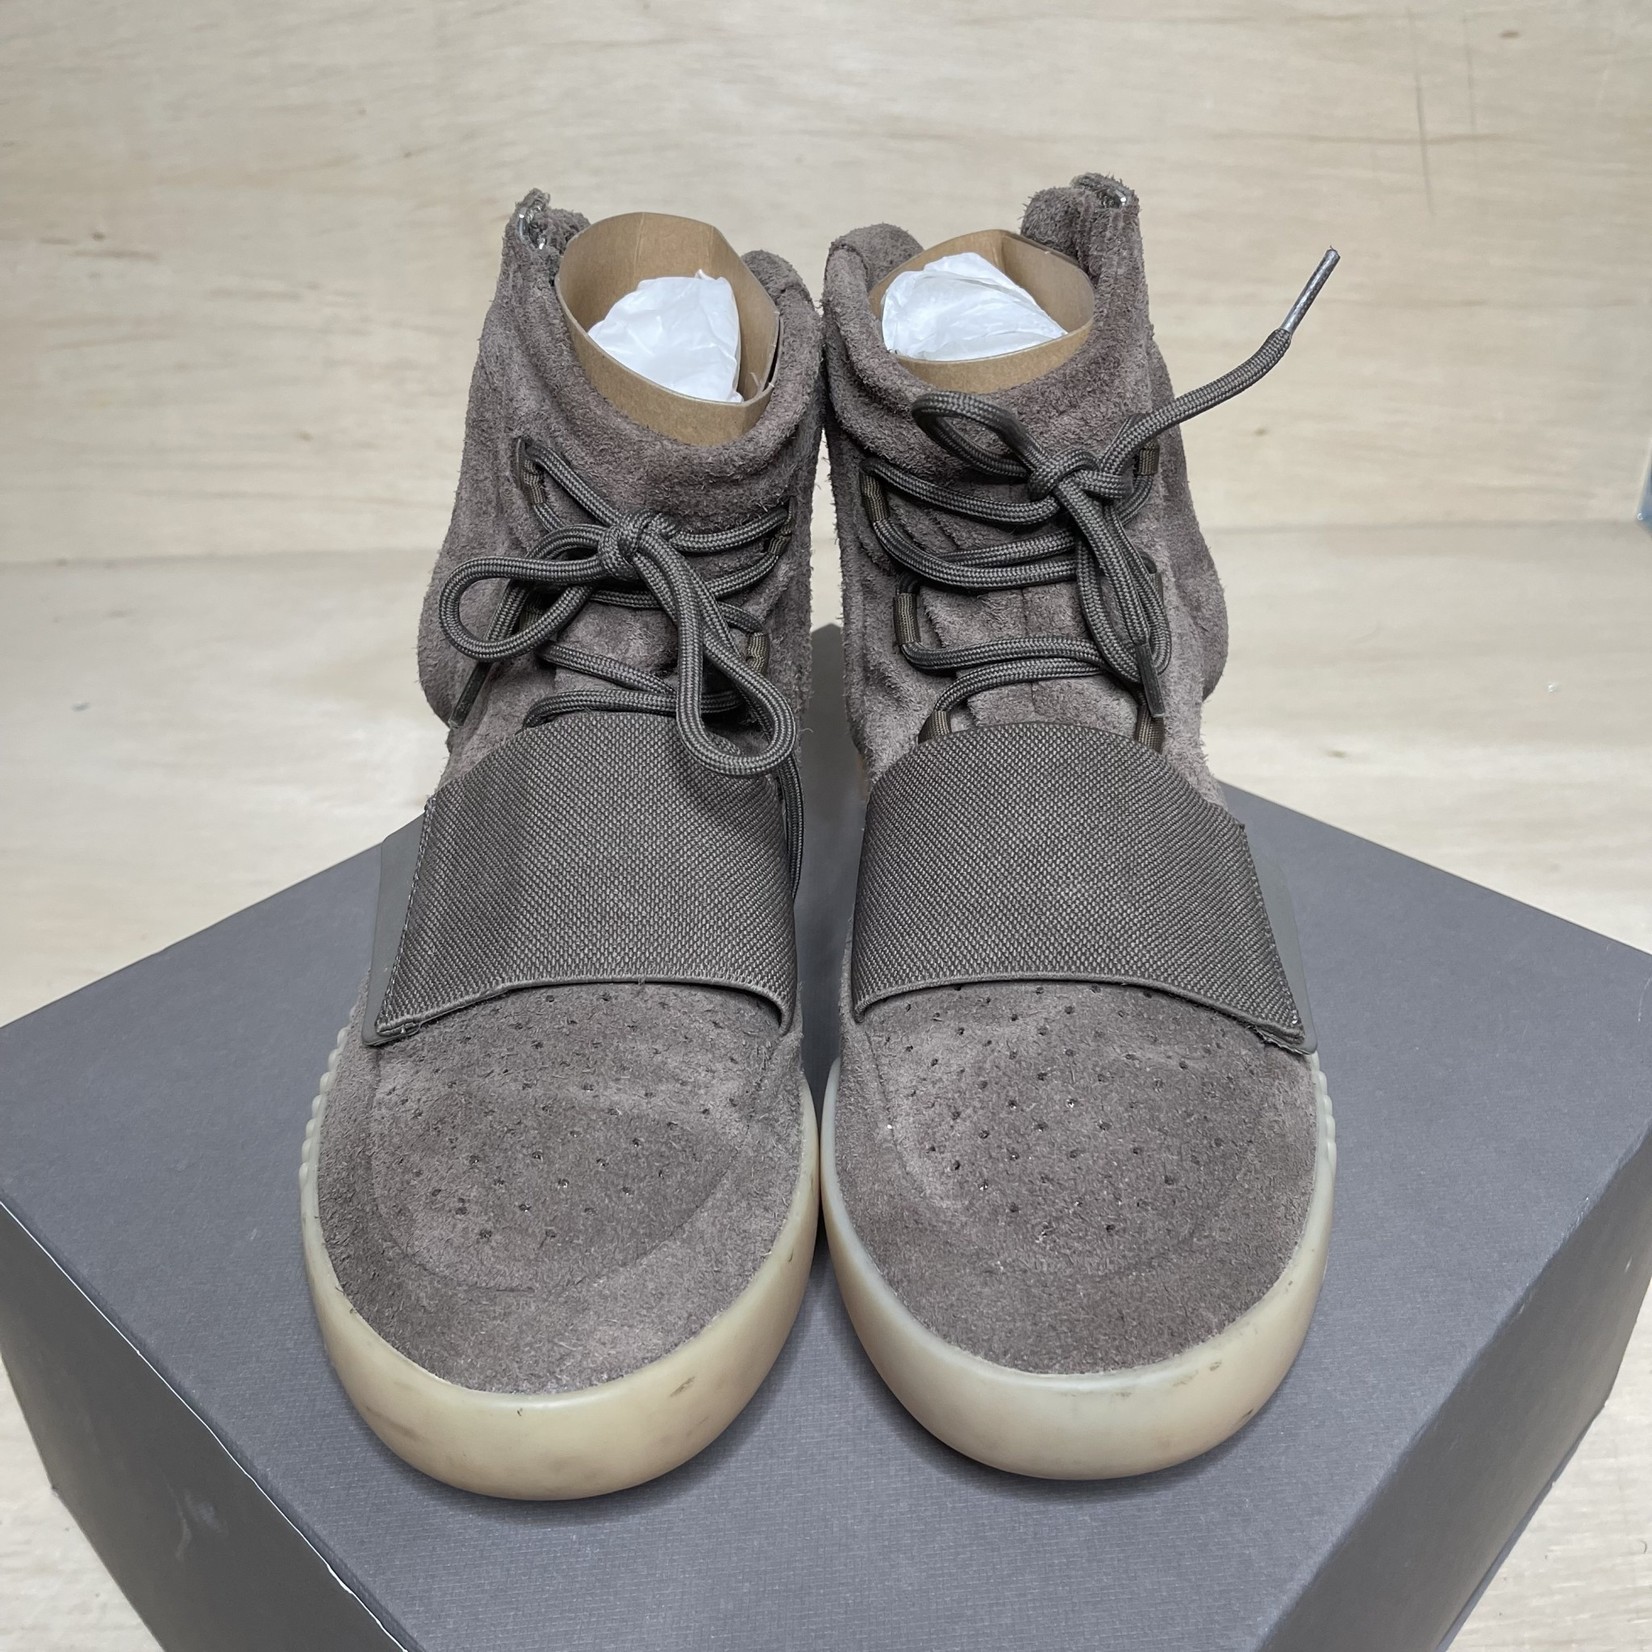 Adidas Adidas Yeezy Boost 750 Light Brown Gum (Chocolate) Size 10.5, PREOWNED